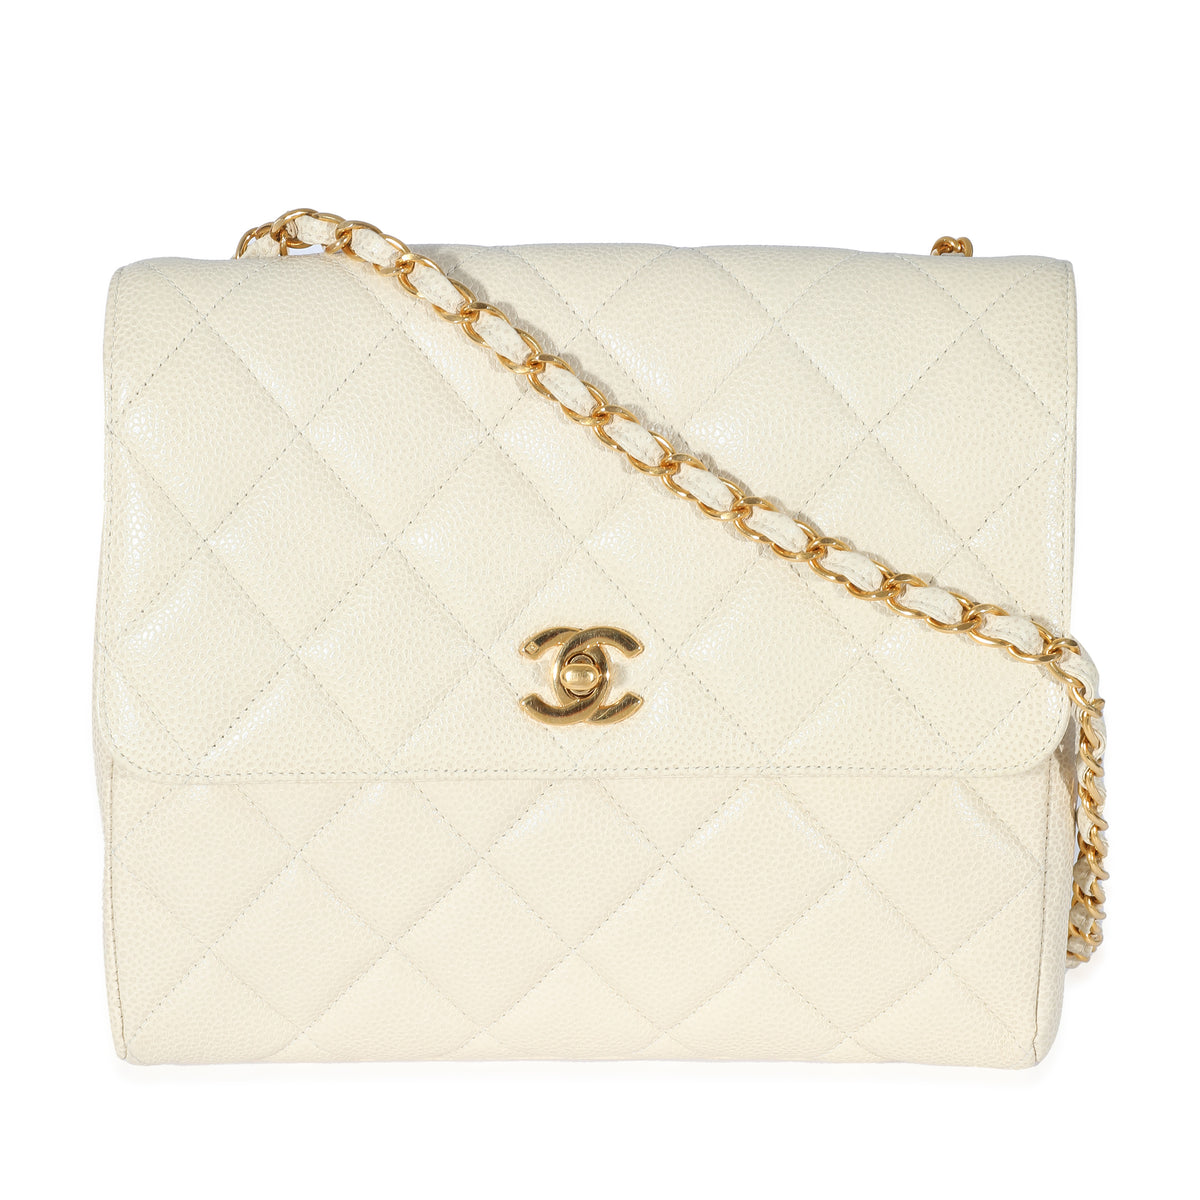 Chanel Beige Quilted Caviar Chain Flap Bag